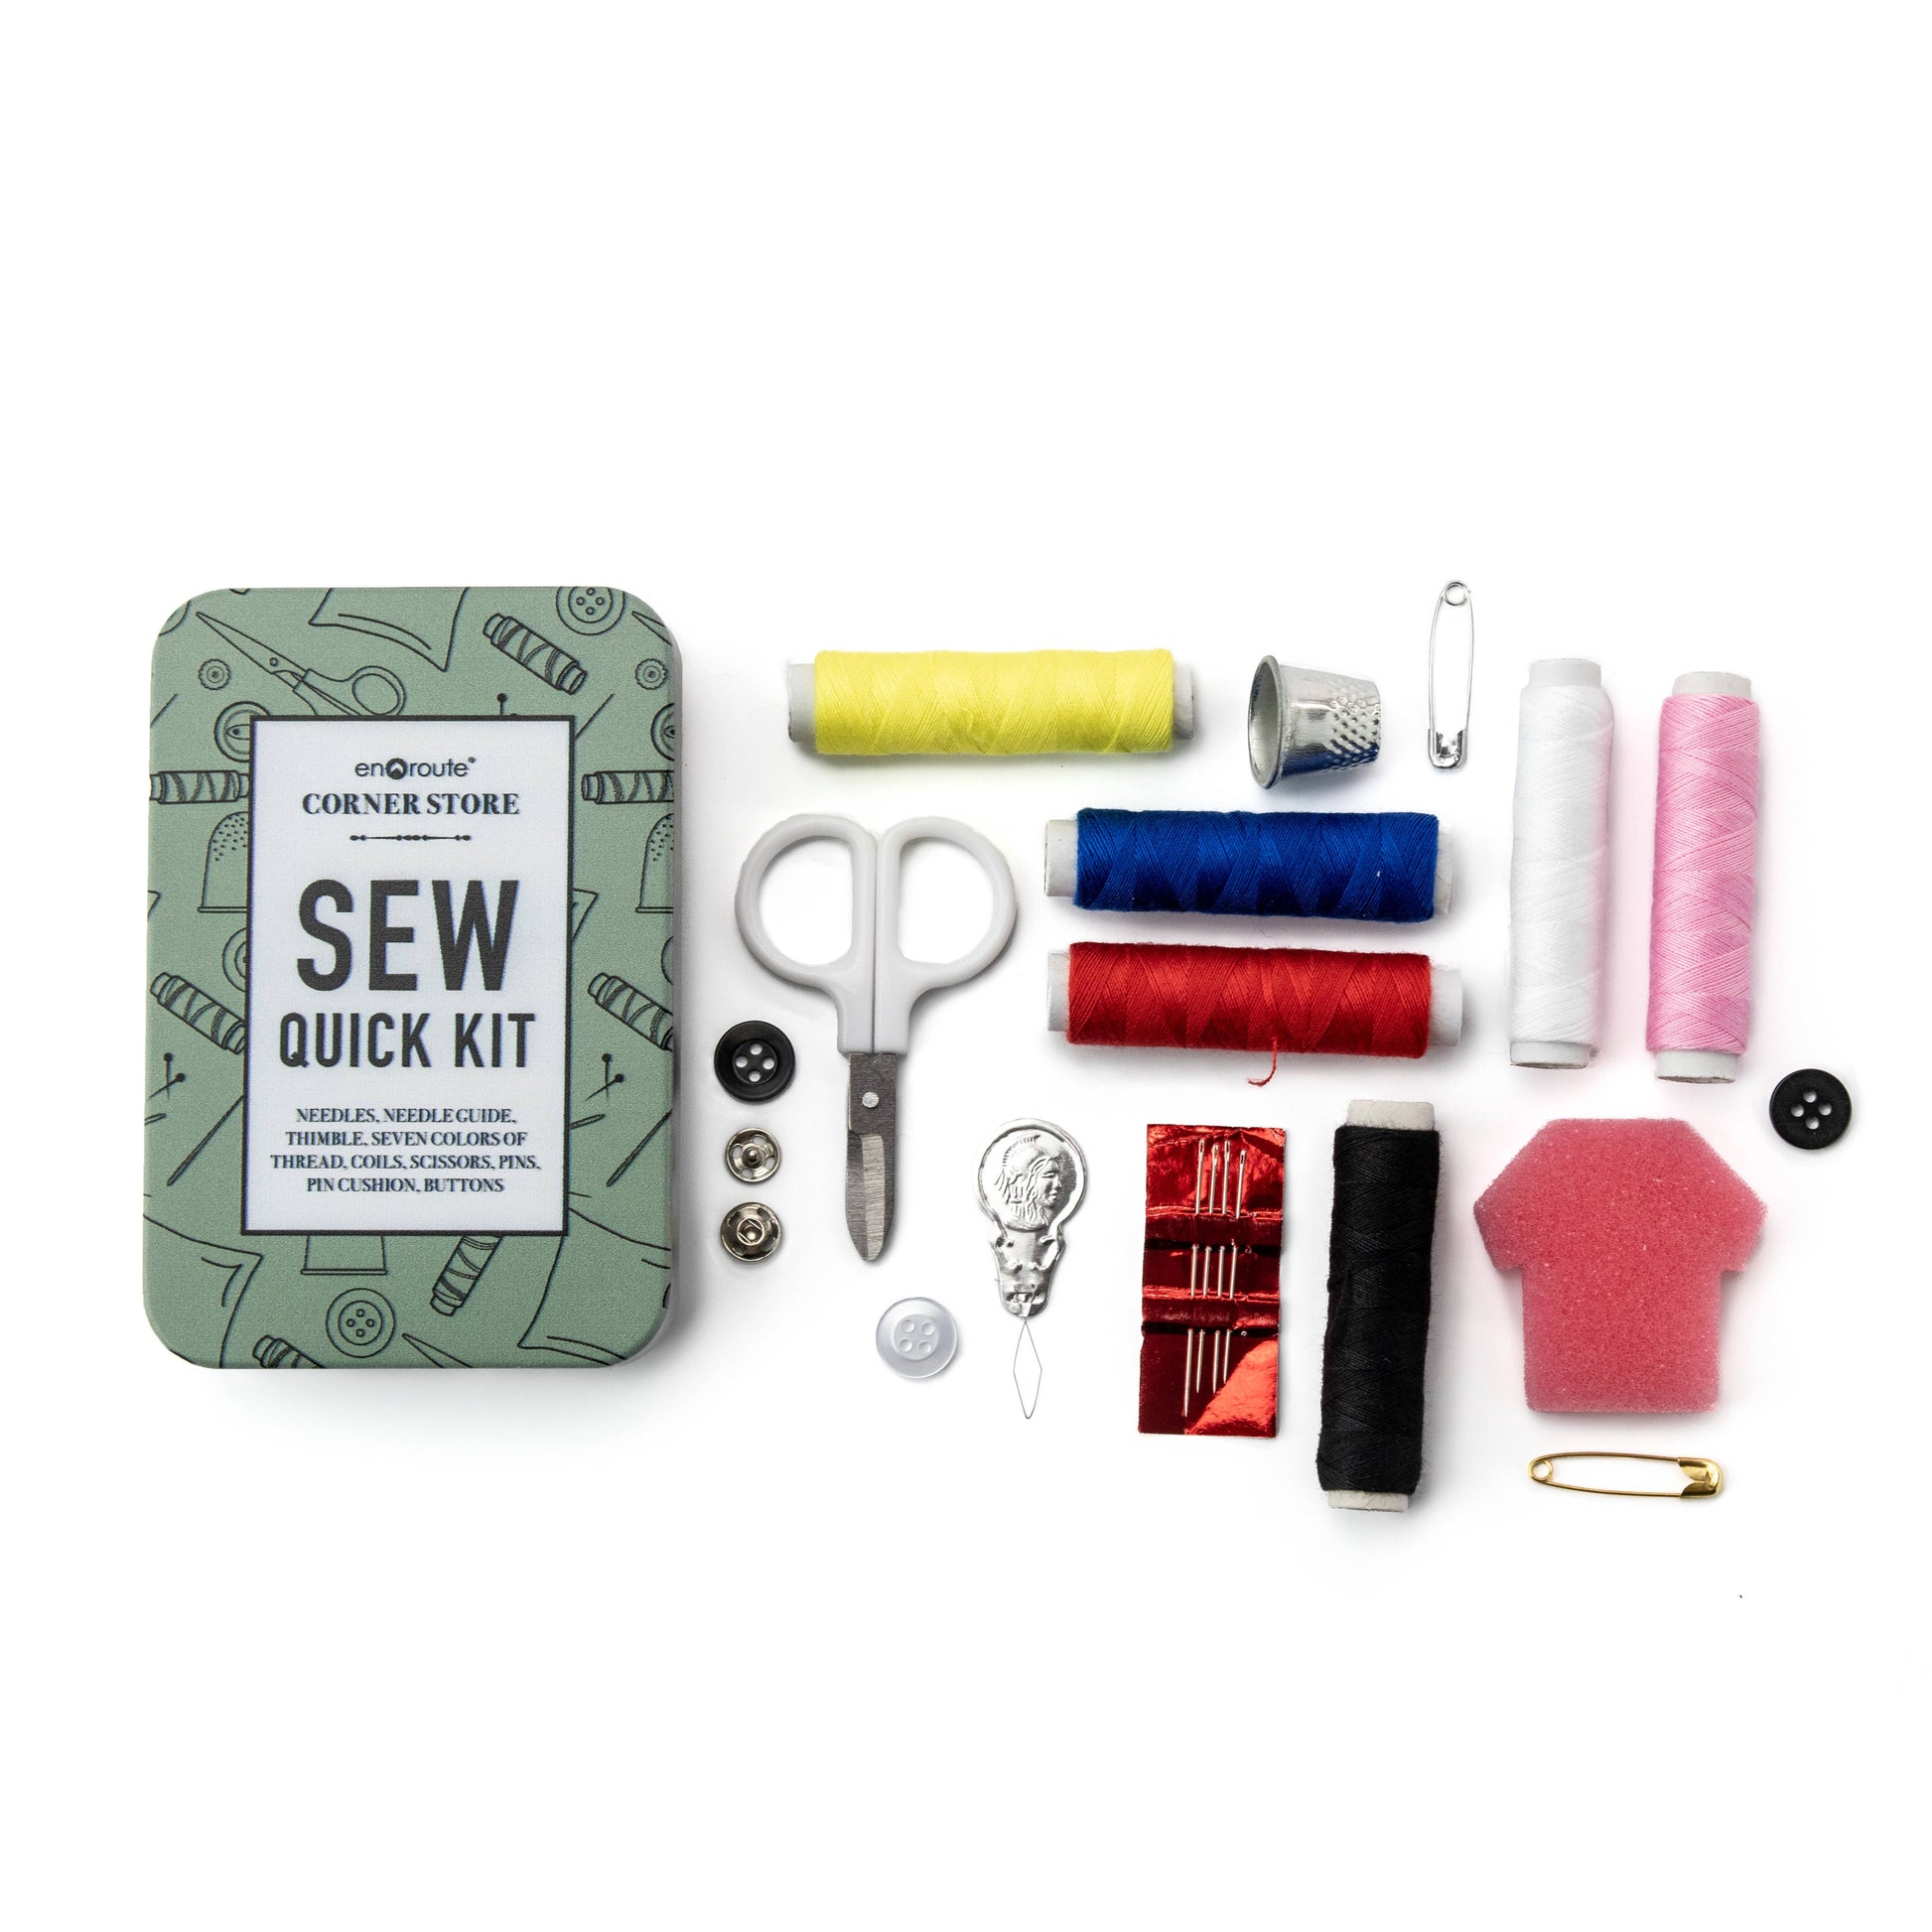 contents of the "sew quick kit"